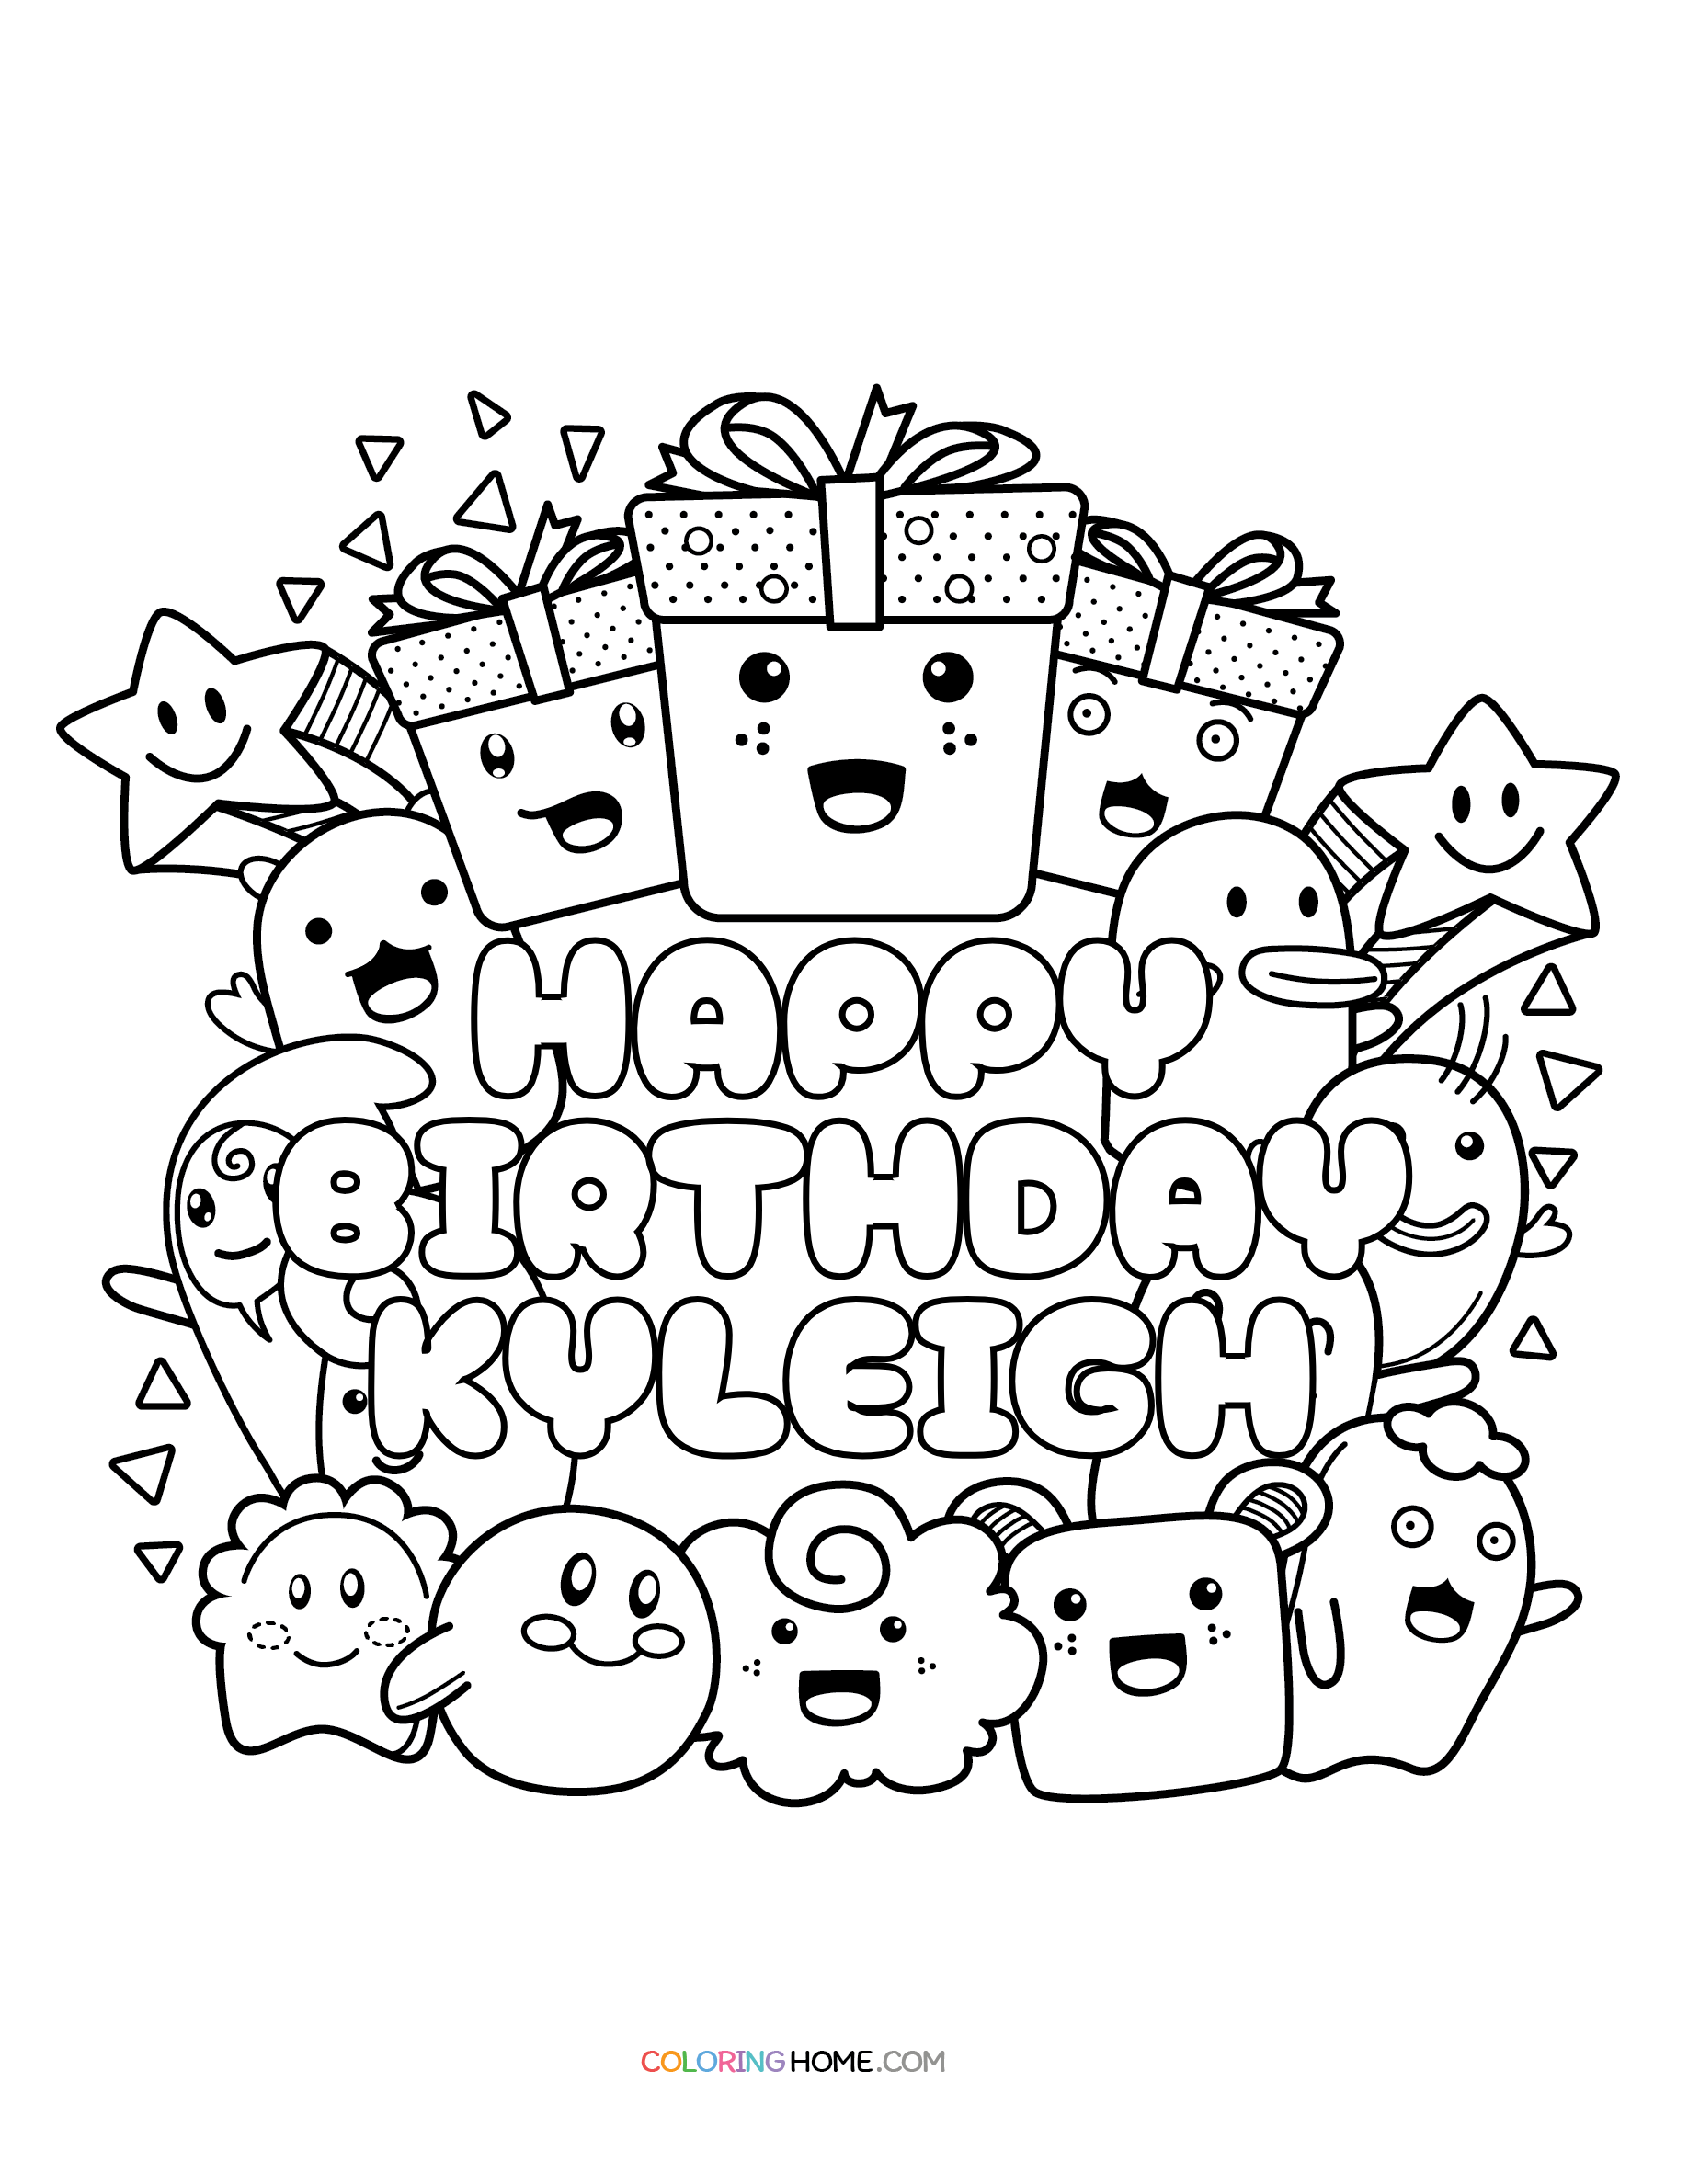 Happy Birthday Kyleigh coloring page